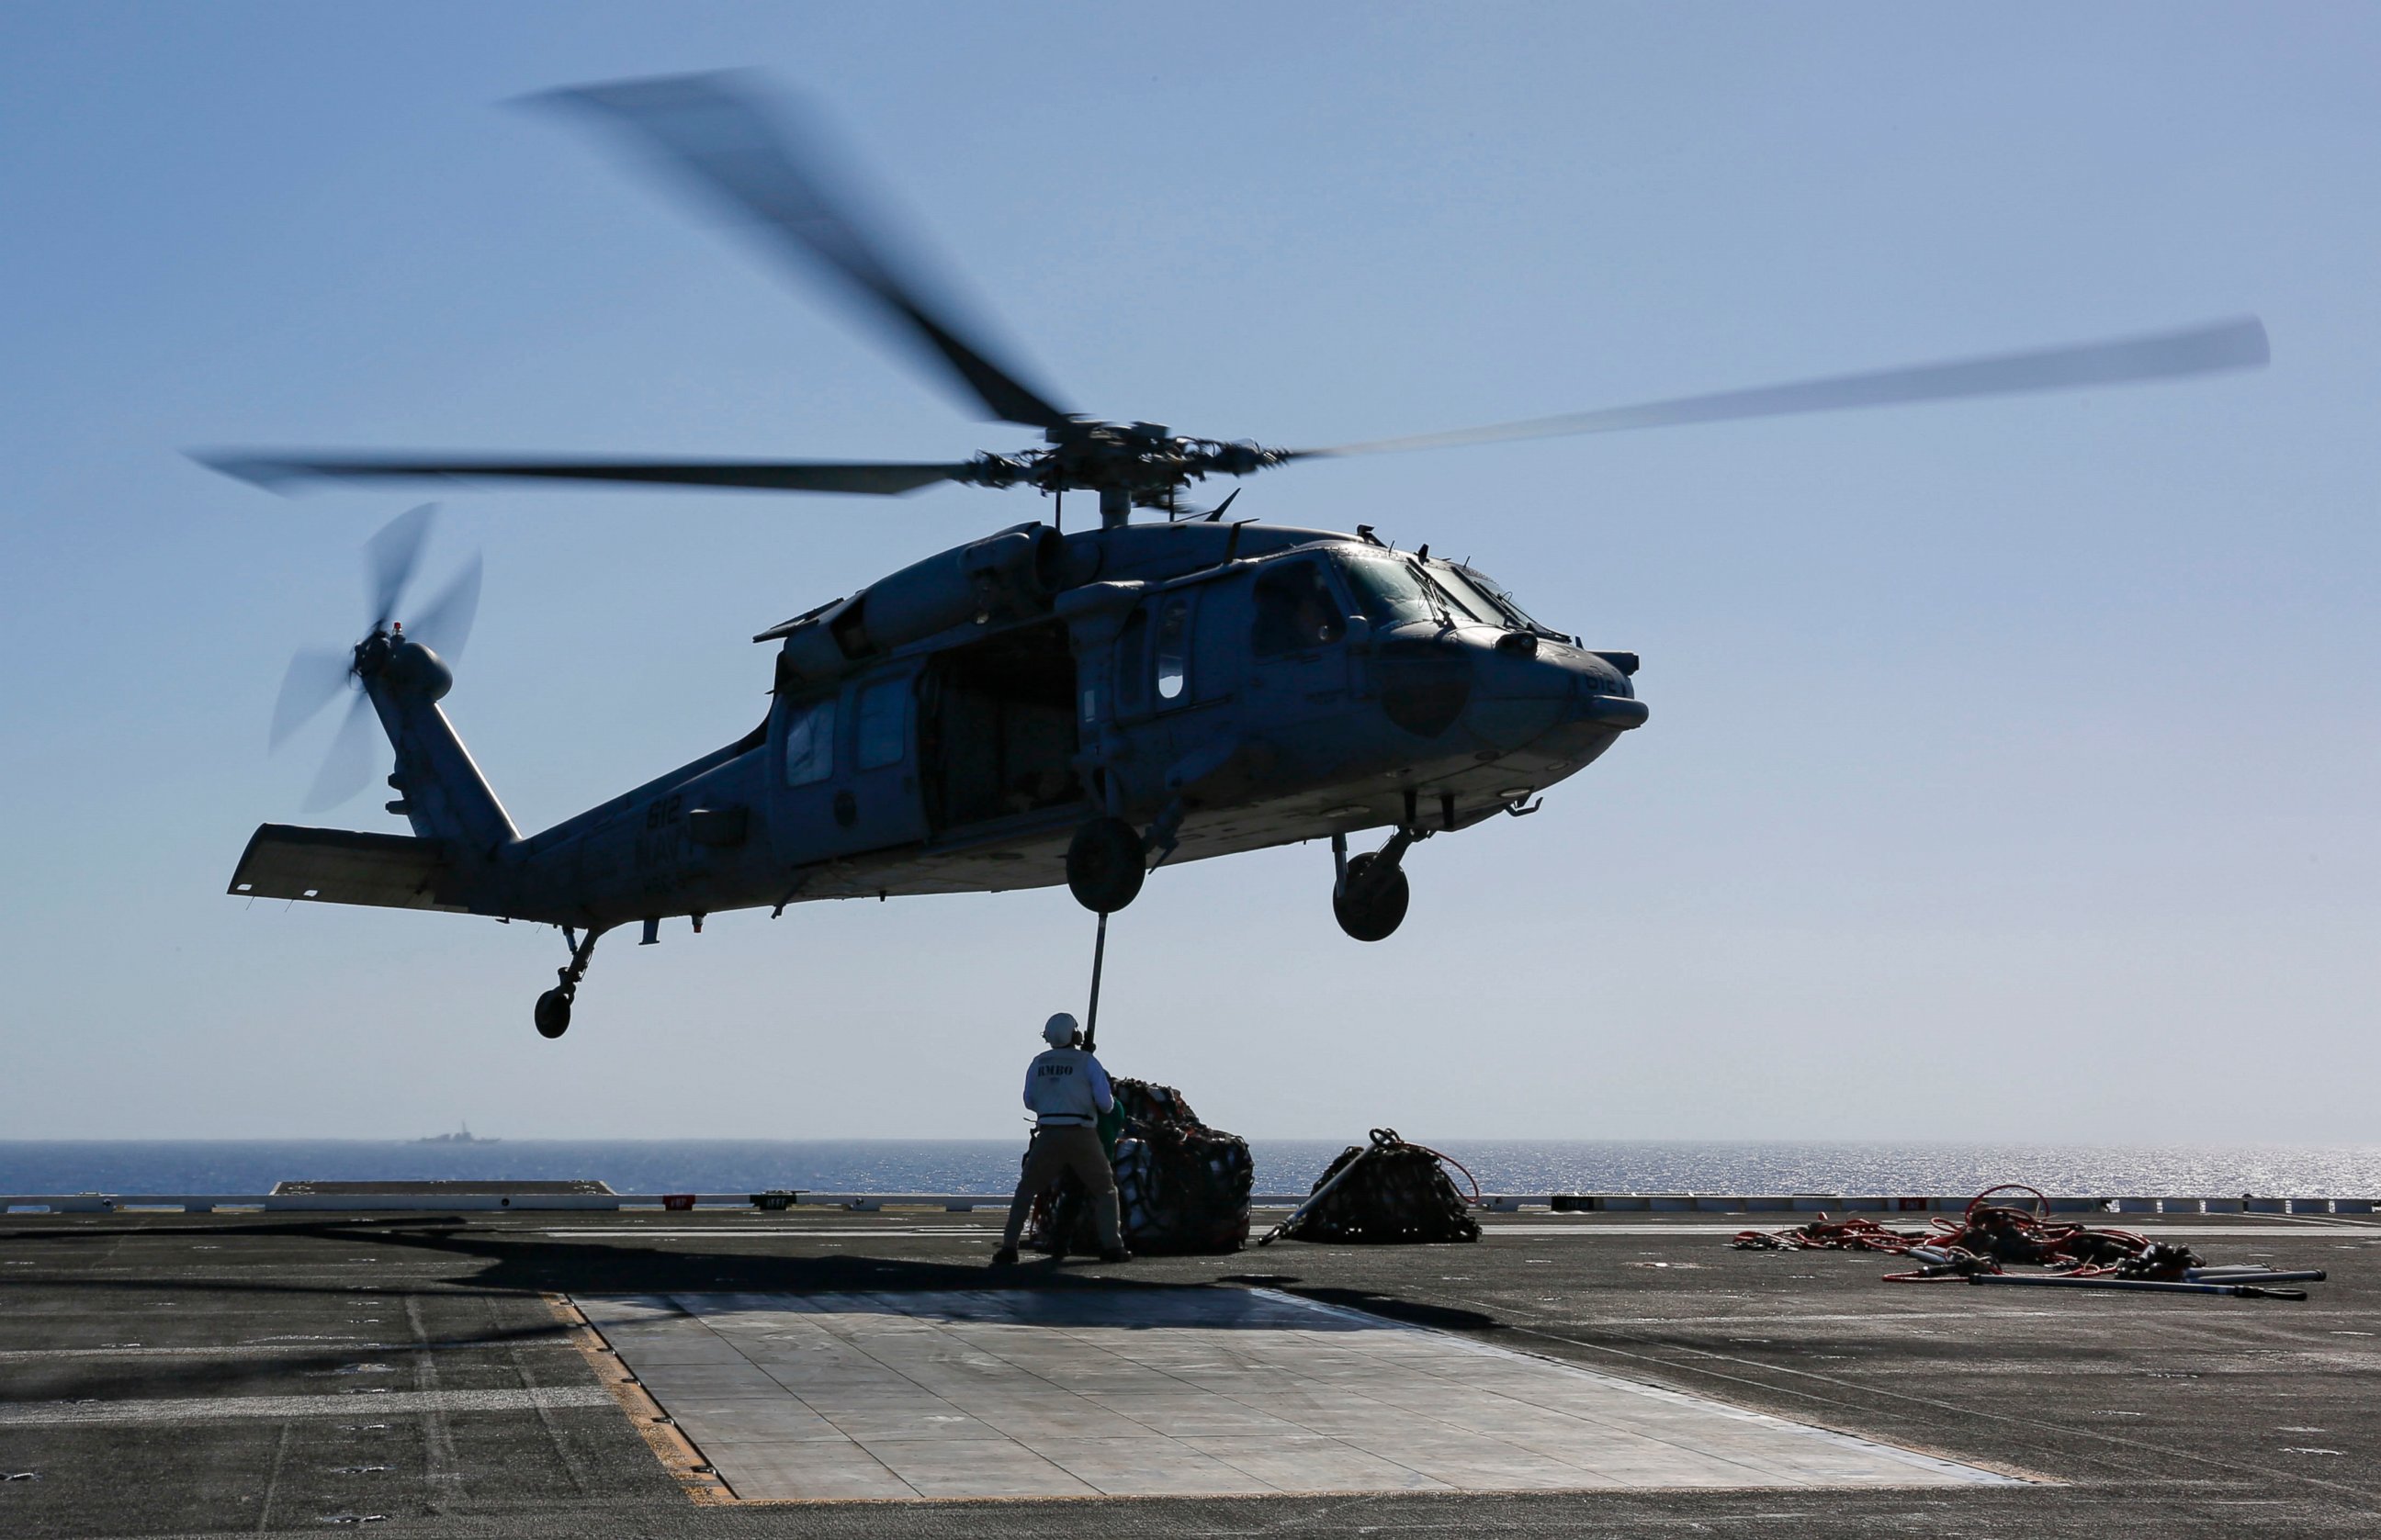 PHOTO: In this Friday, May 10, 2019, photo released by the U.S. Navy, logistics specialists attach cargo to an MH-60S Sea Hawk helicopter on the flight deck of the Nimitz-class aircraft carrier USS Abraham Lincoln in the Persian Gulf.